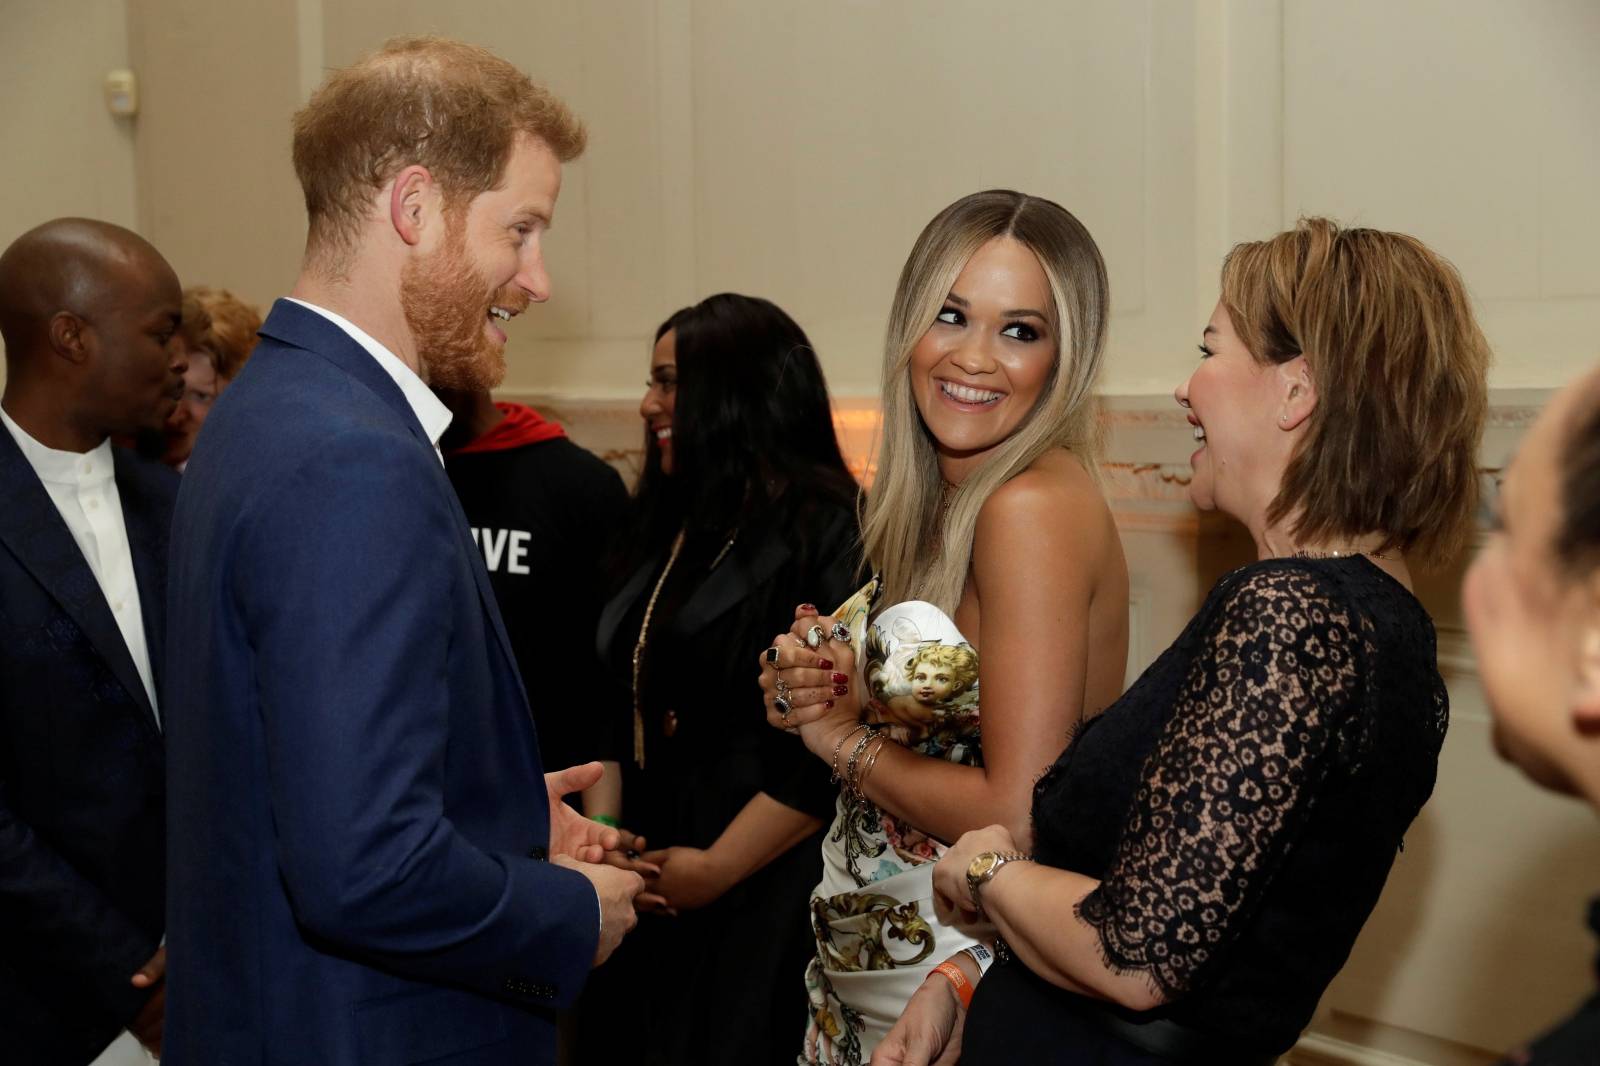 Britain's Prince Harry speaks with singer Rita Ora during a reception before a concert in London